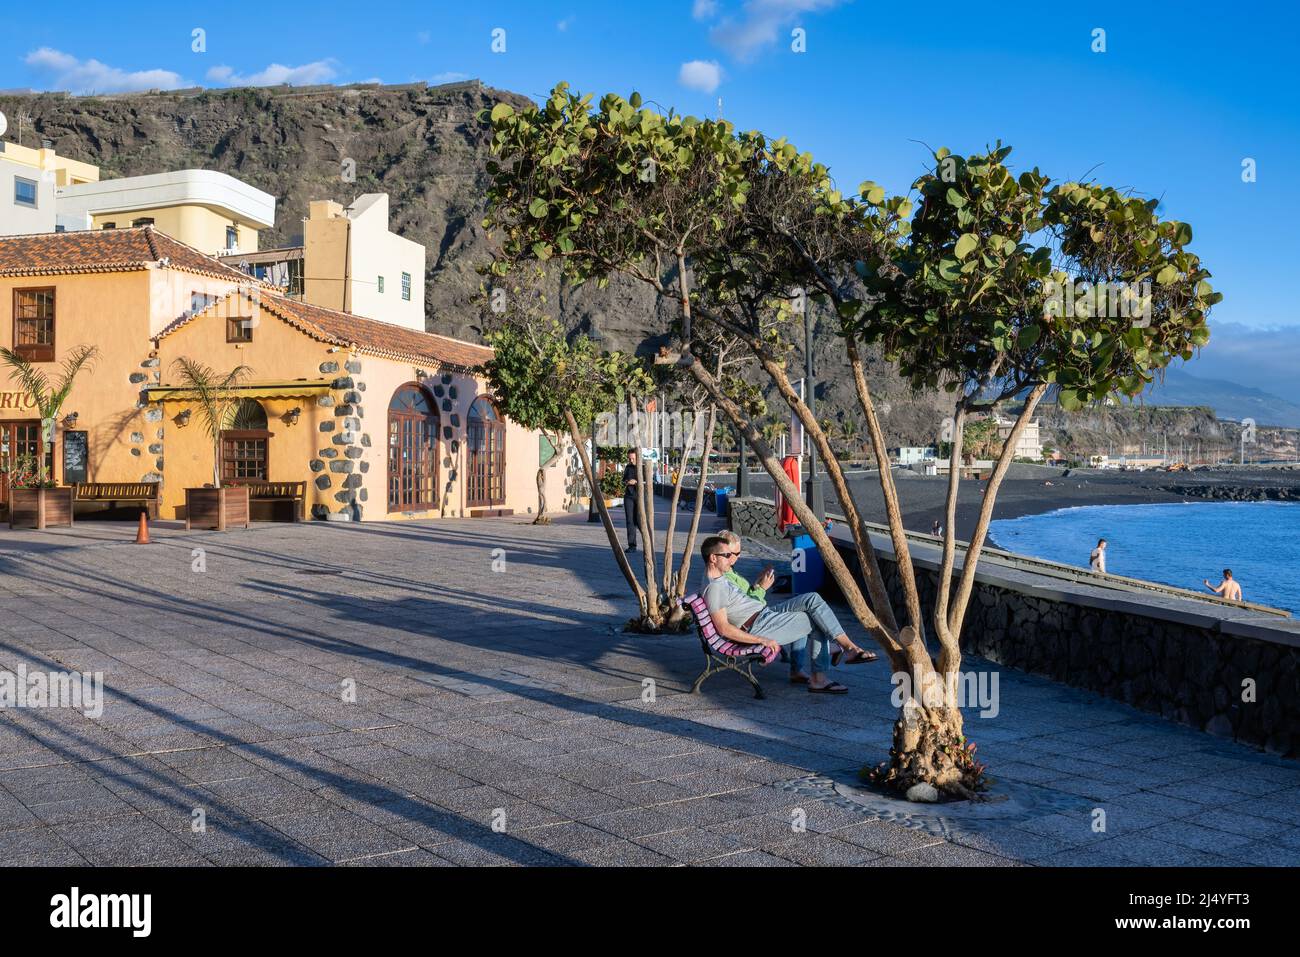 Tazacorte at La Palma Island Spain - March 07, 2022: Boulevard and couple sitting at wooden bench relaxing during sunset at Atlantic Coast Stock Photo